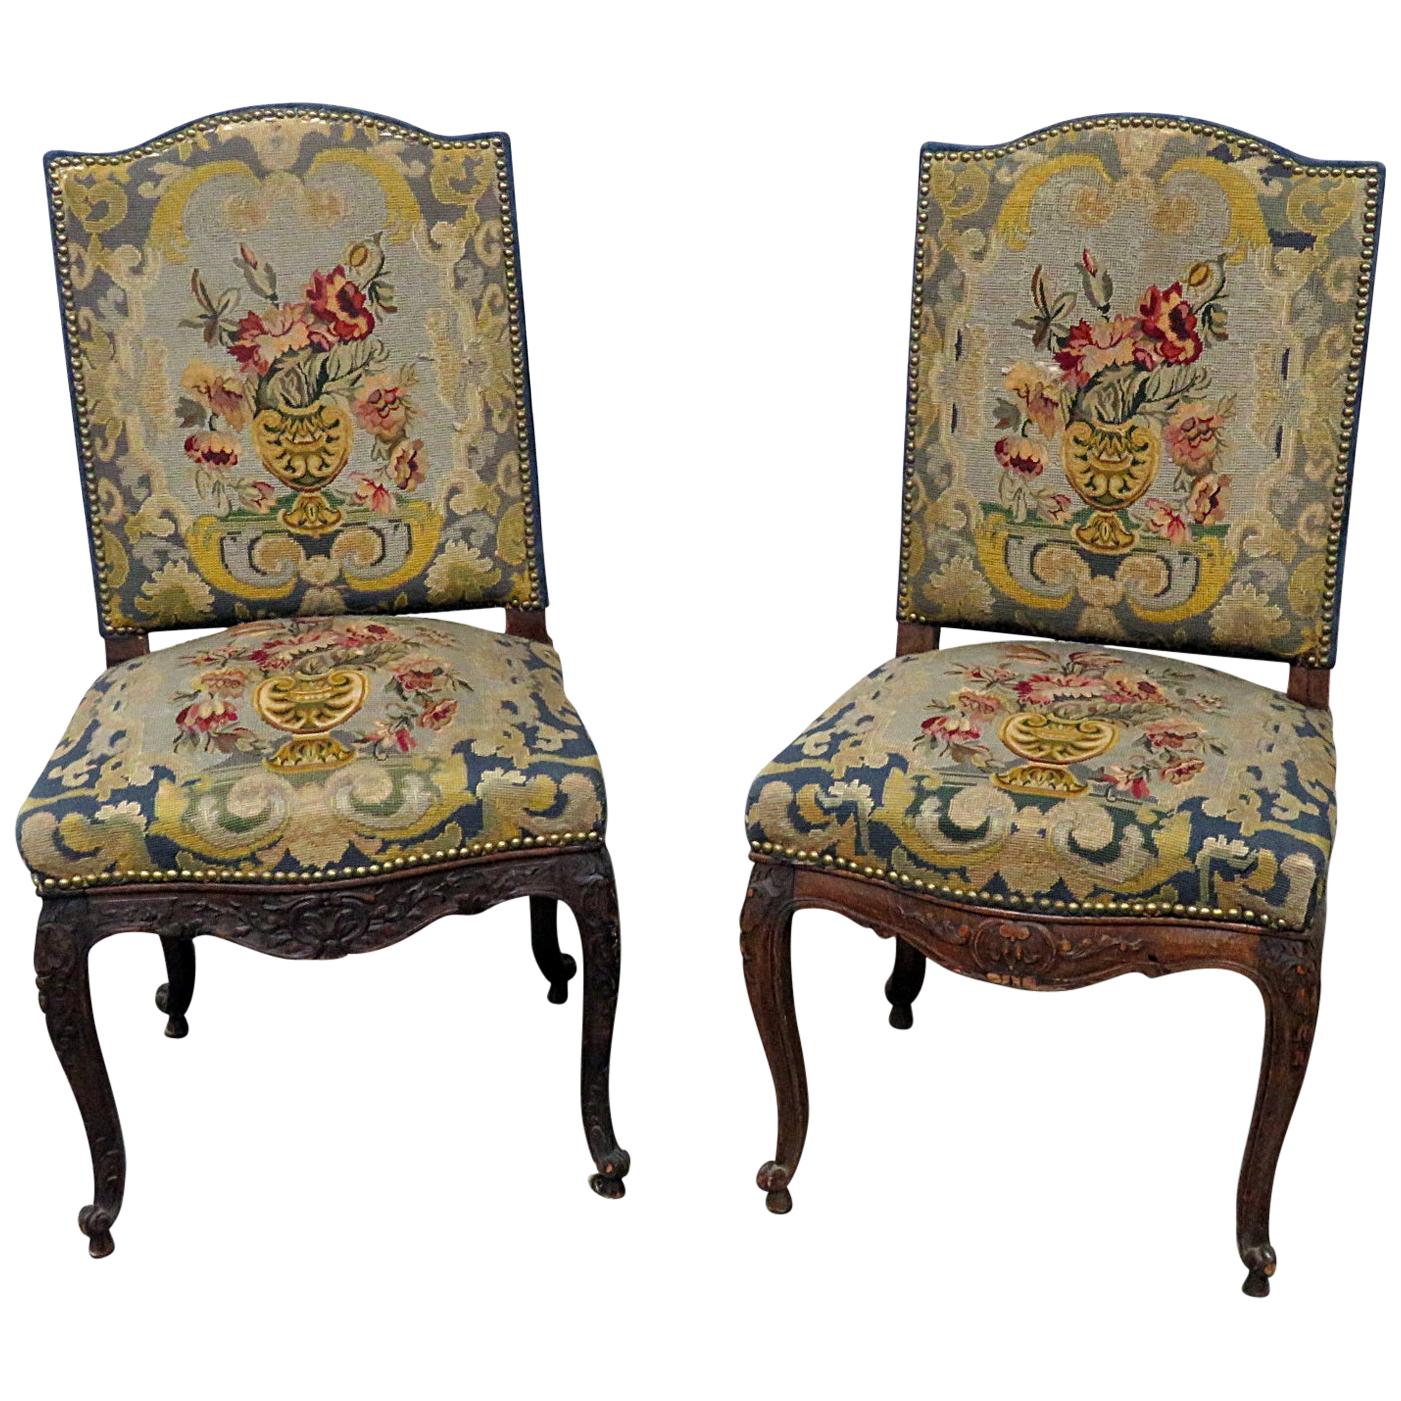 Pair of Louis XV Style Needlepoint Chairs